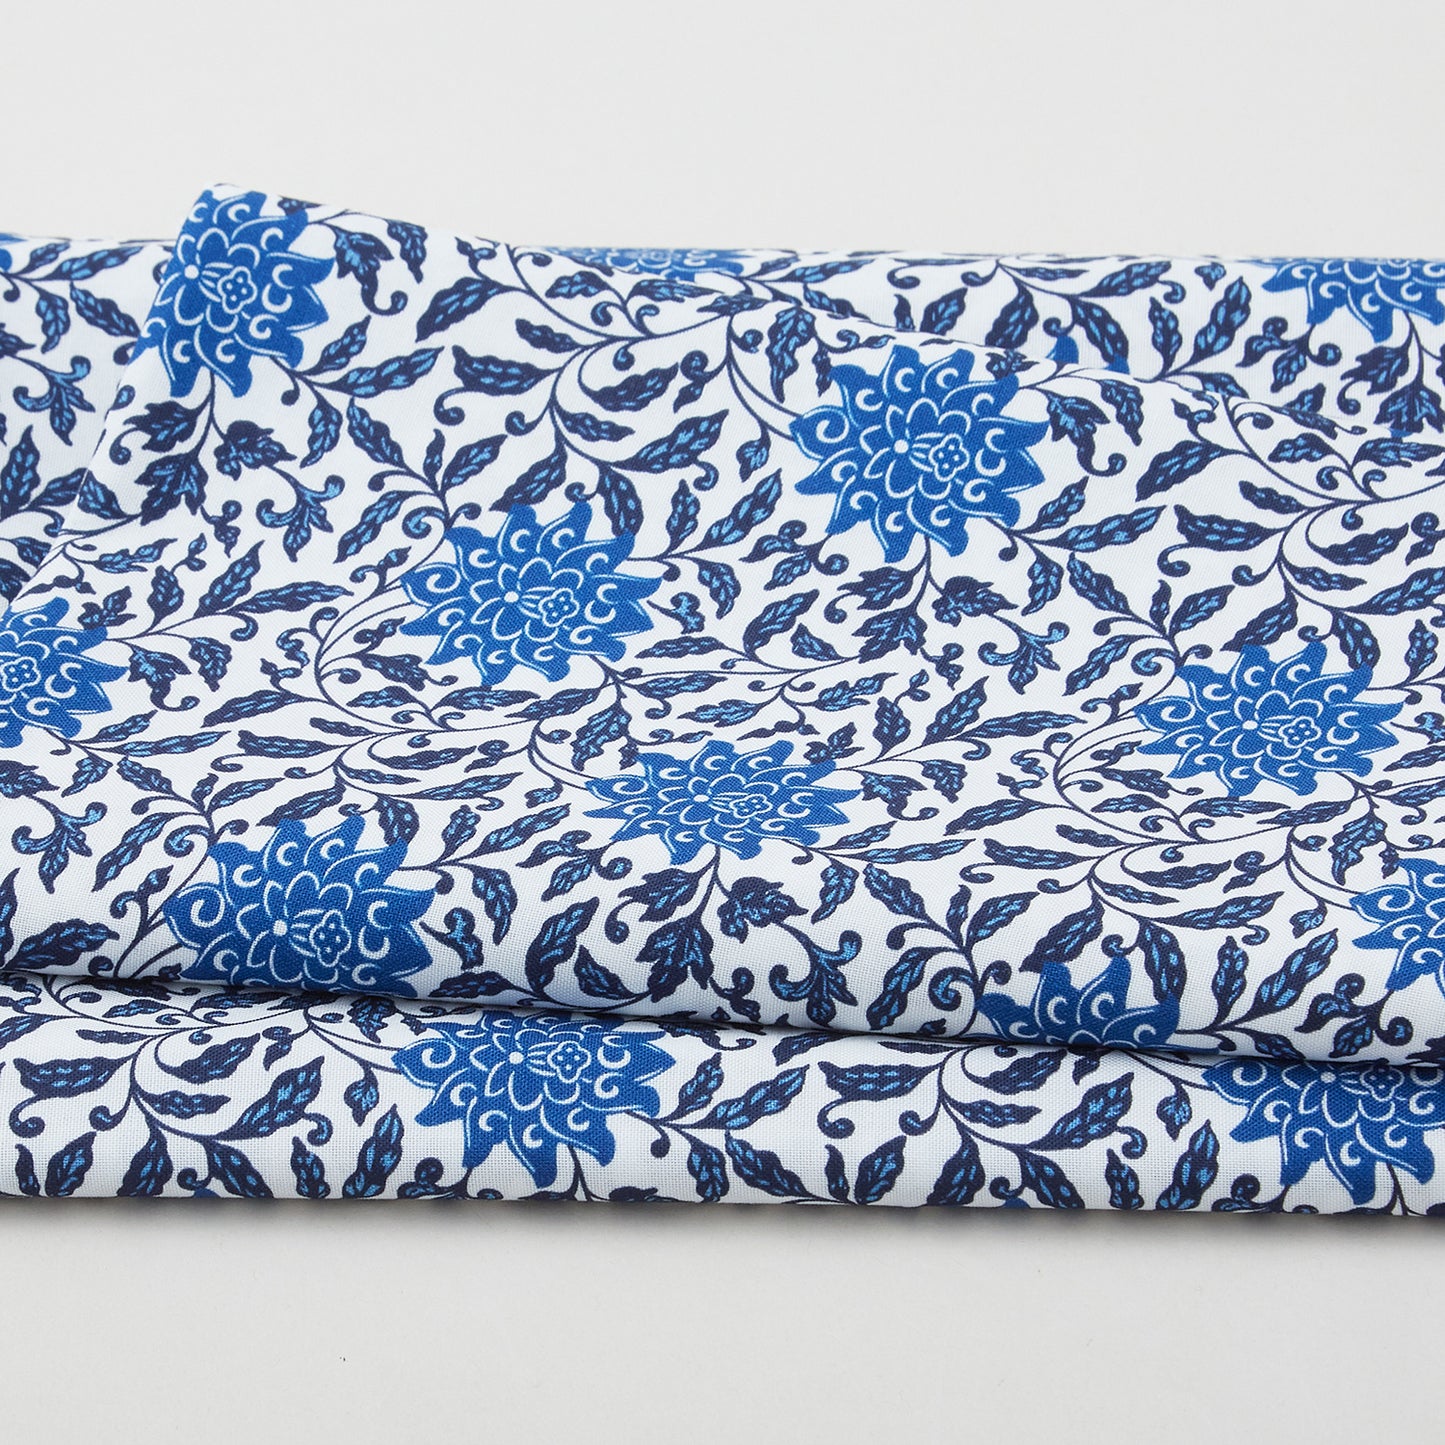 Ming Musings - Blue Dynasty White 2 Yard Cut Primary Image